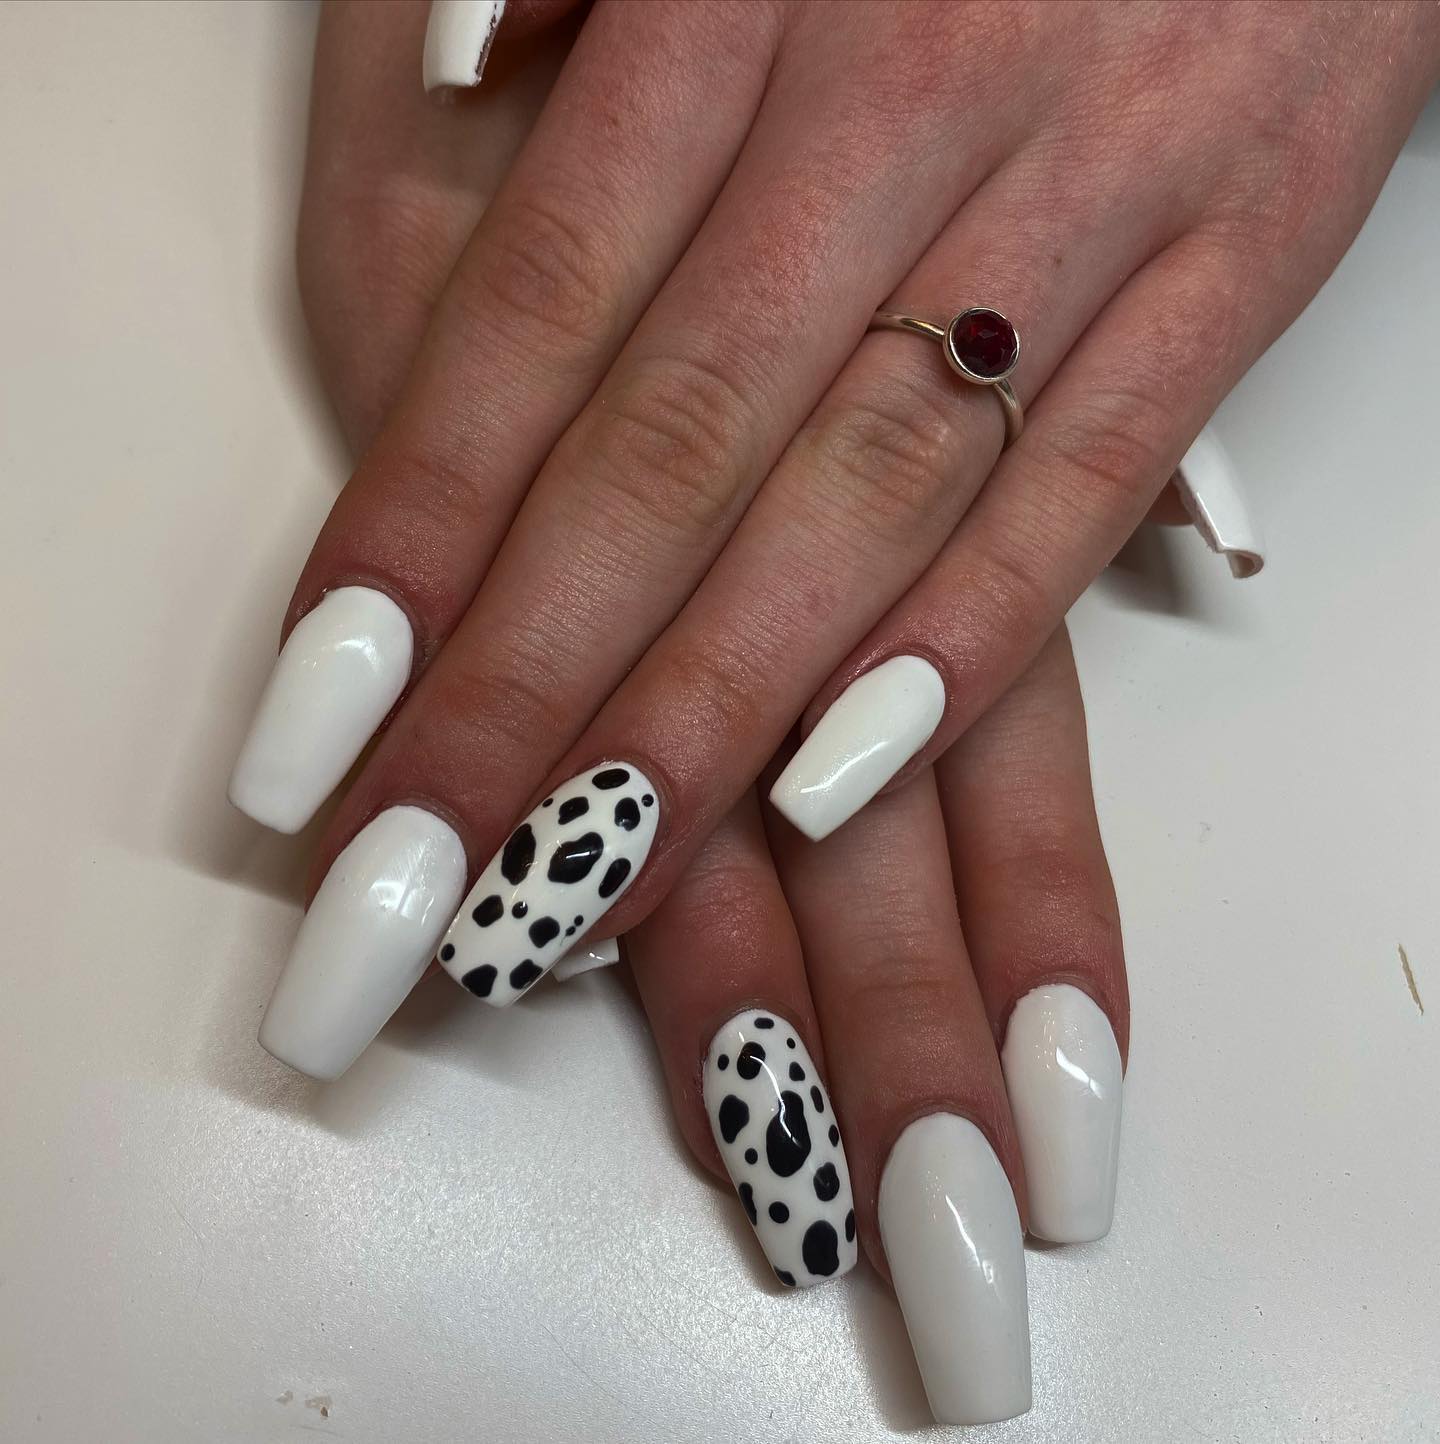 Covering all of your nails with cow prints may not be your thing, so here is a great idea to use a cow print nail art for just one nail. Plus, white is a clean and simple color, but it can also look elegant and sophisticated, depending on how you style it.